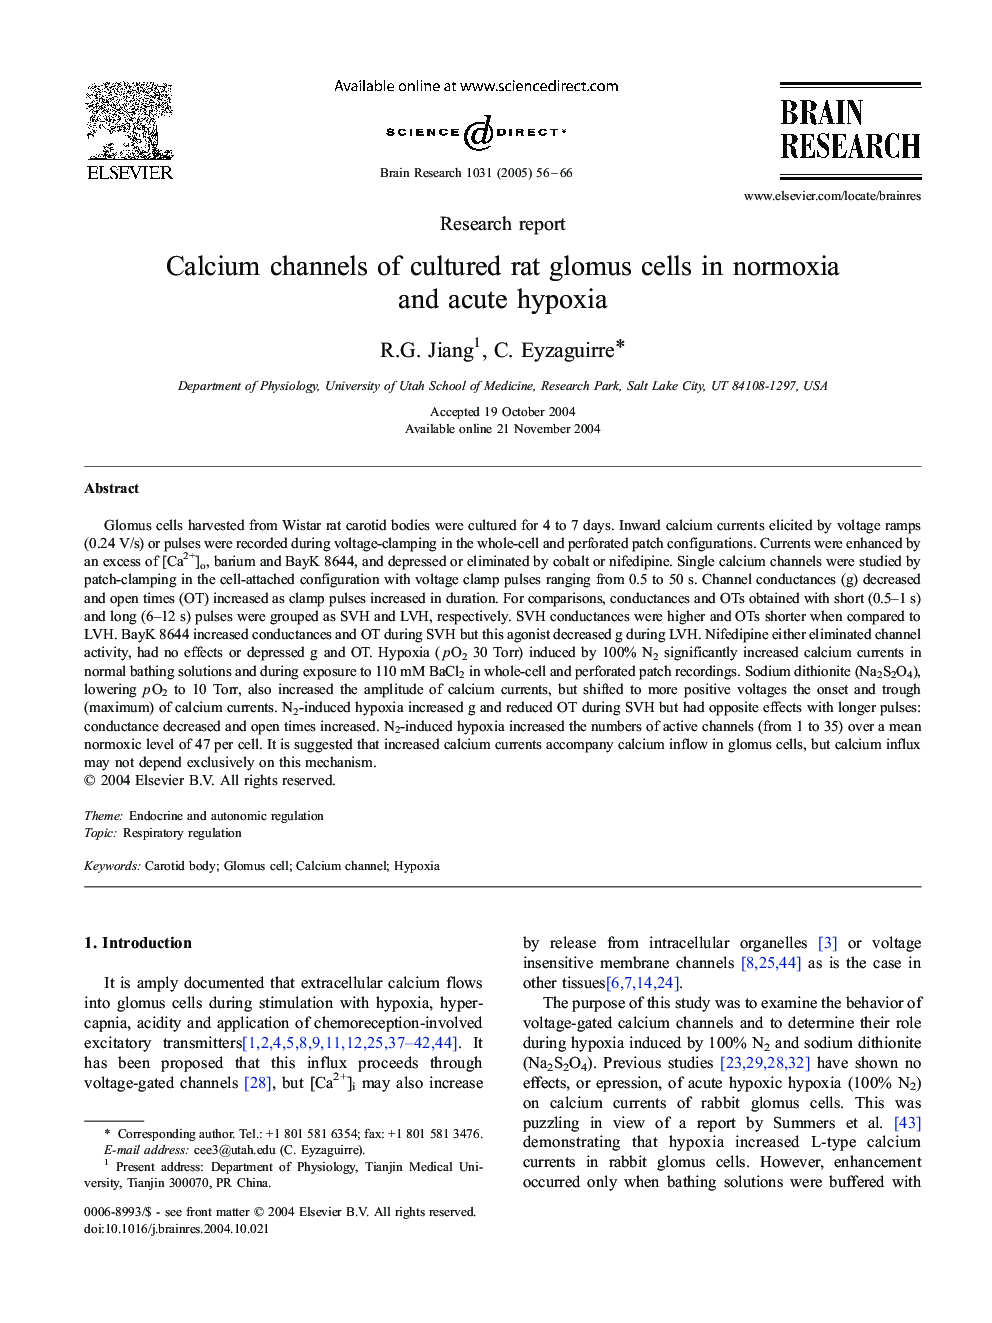 Calcium channels of cultured rat glomus cells in normoxia and acute hypoxia